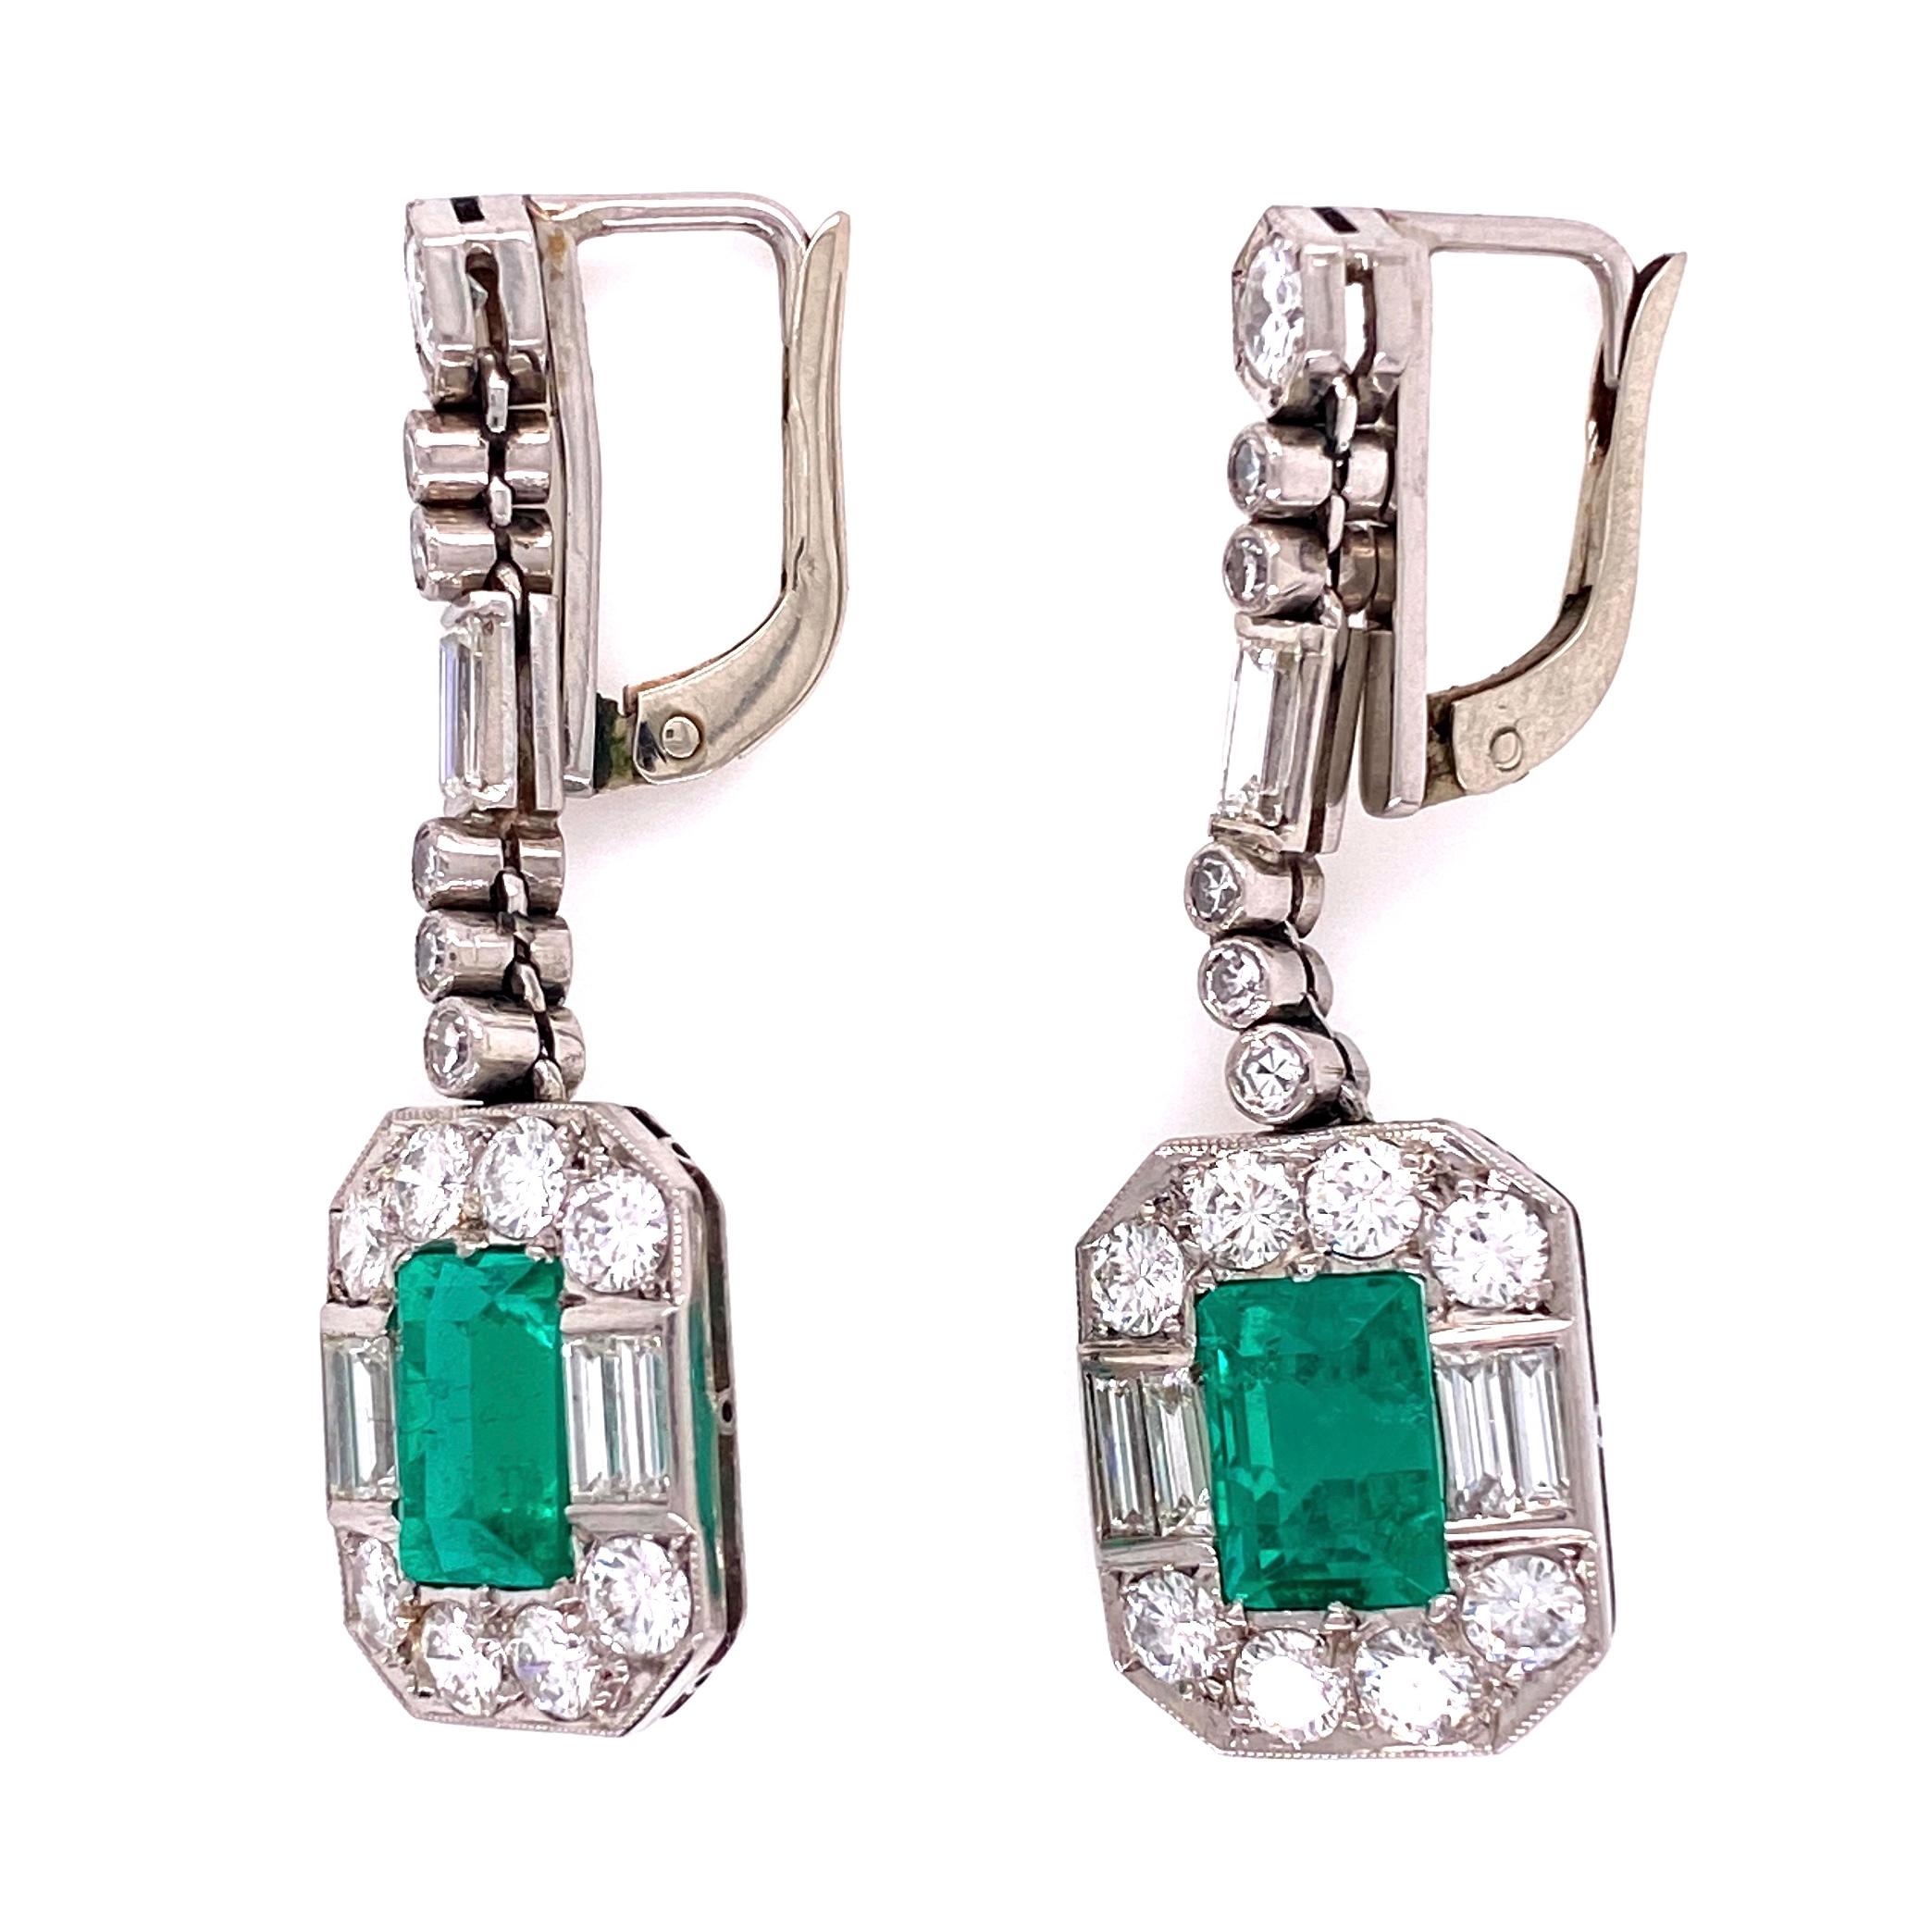 Beautiful, Elegant & finely detailed Cluster Dangle Earrings set with Green Columbian Emerald Gemstones, approx. total weight of the 2 Emeralds 4.00 Carats and enhanced with Diamonds, approx. total weight 3.00 Carats. Lever back earrings measure